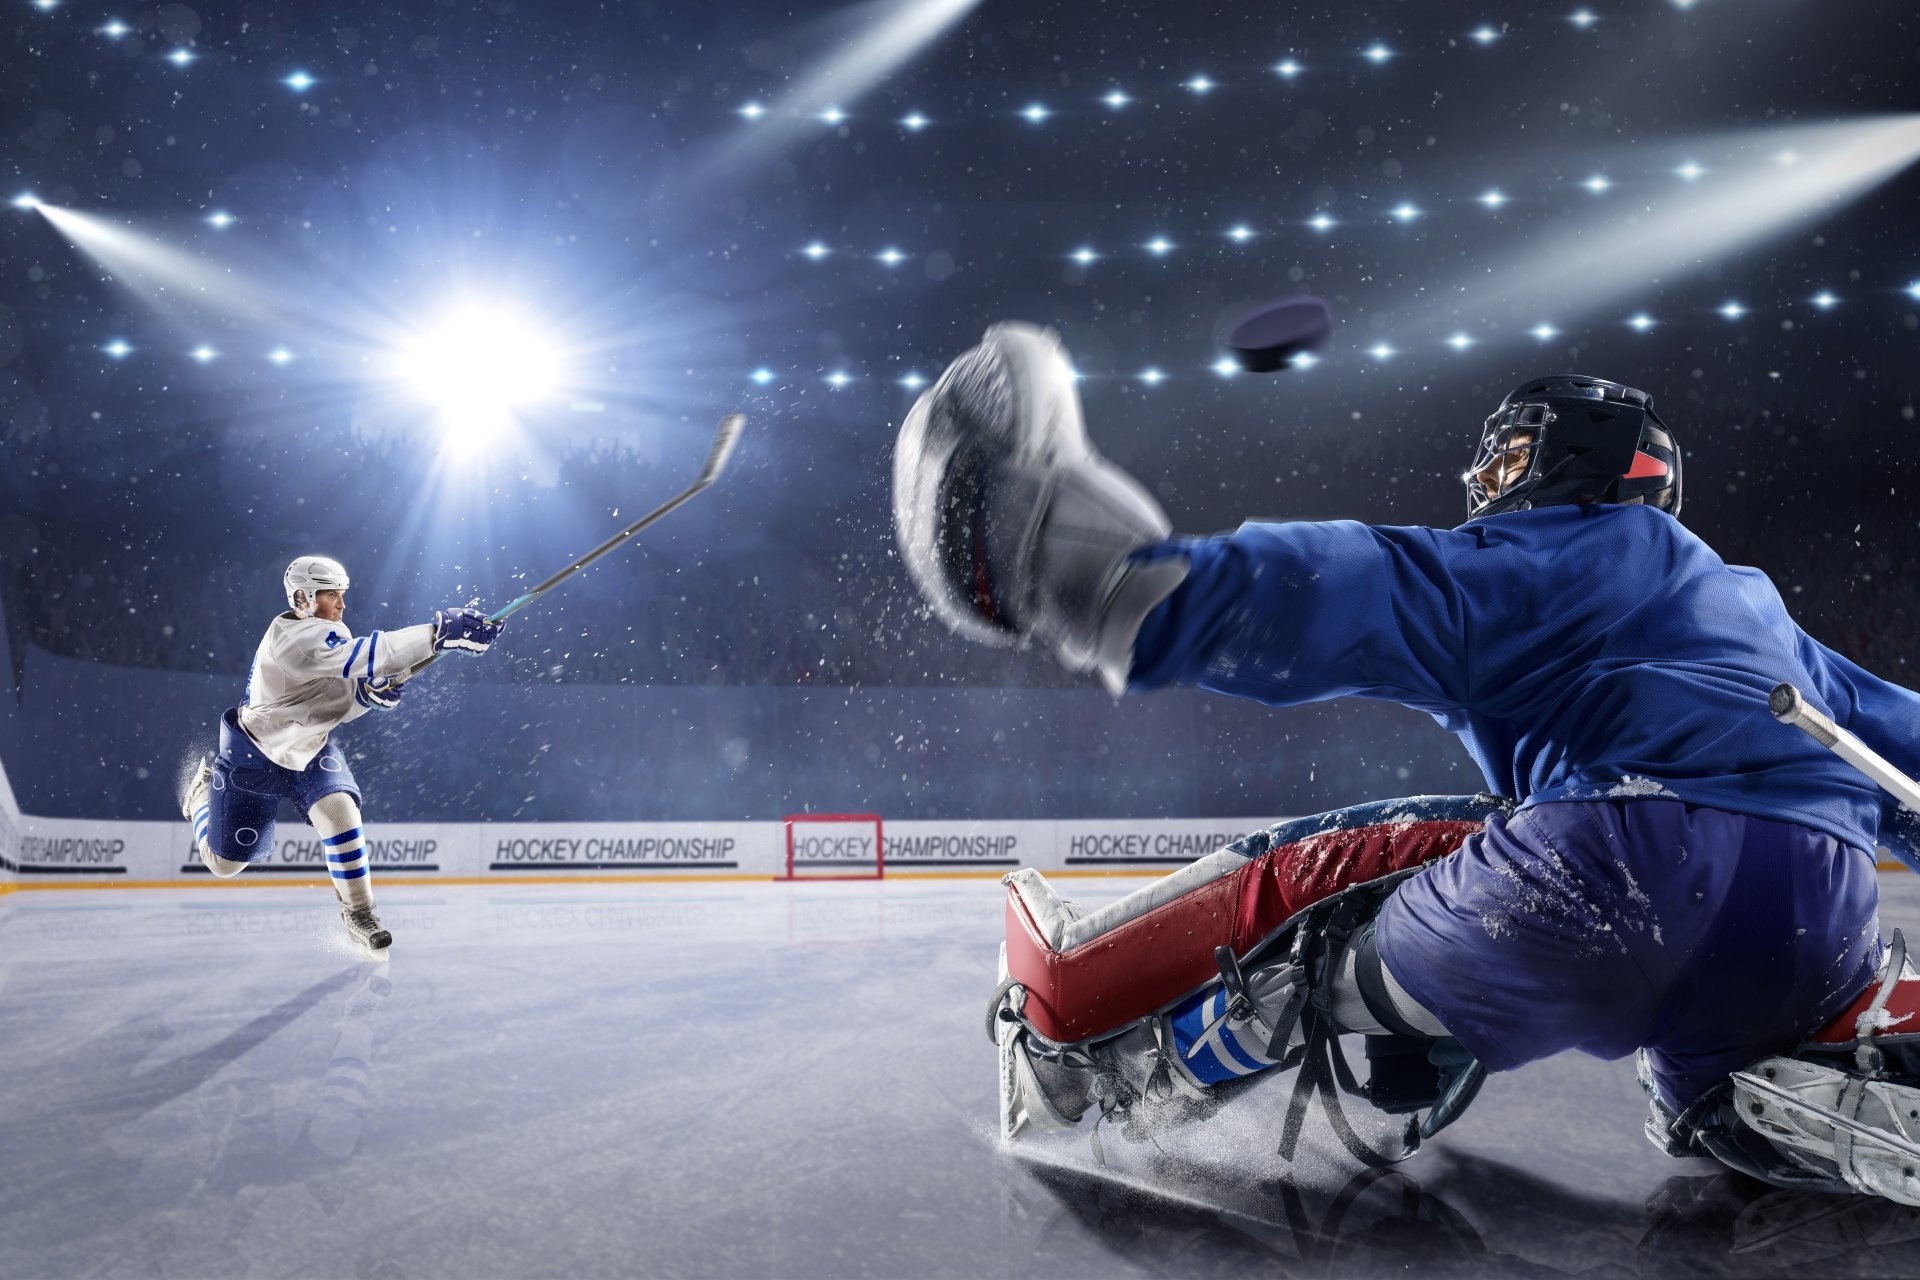 4K ultra HD hockey wallpapers, Stunning image quality, Spectacular goals, Captivating game scenes, 1920x1280 HD Desktop